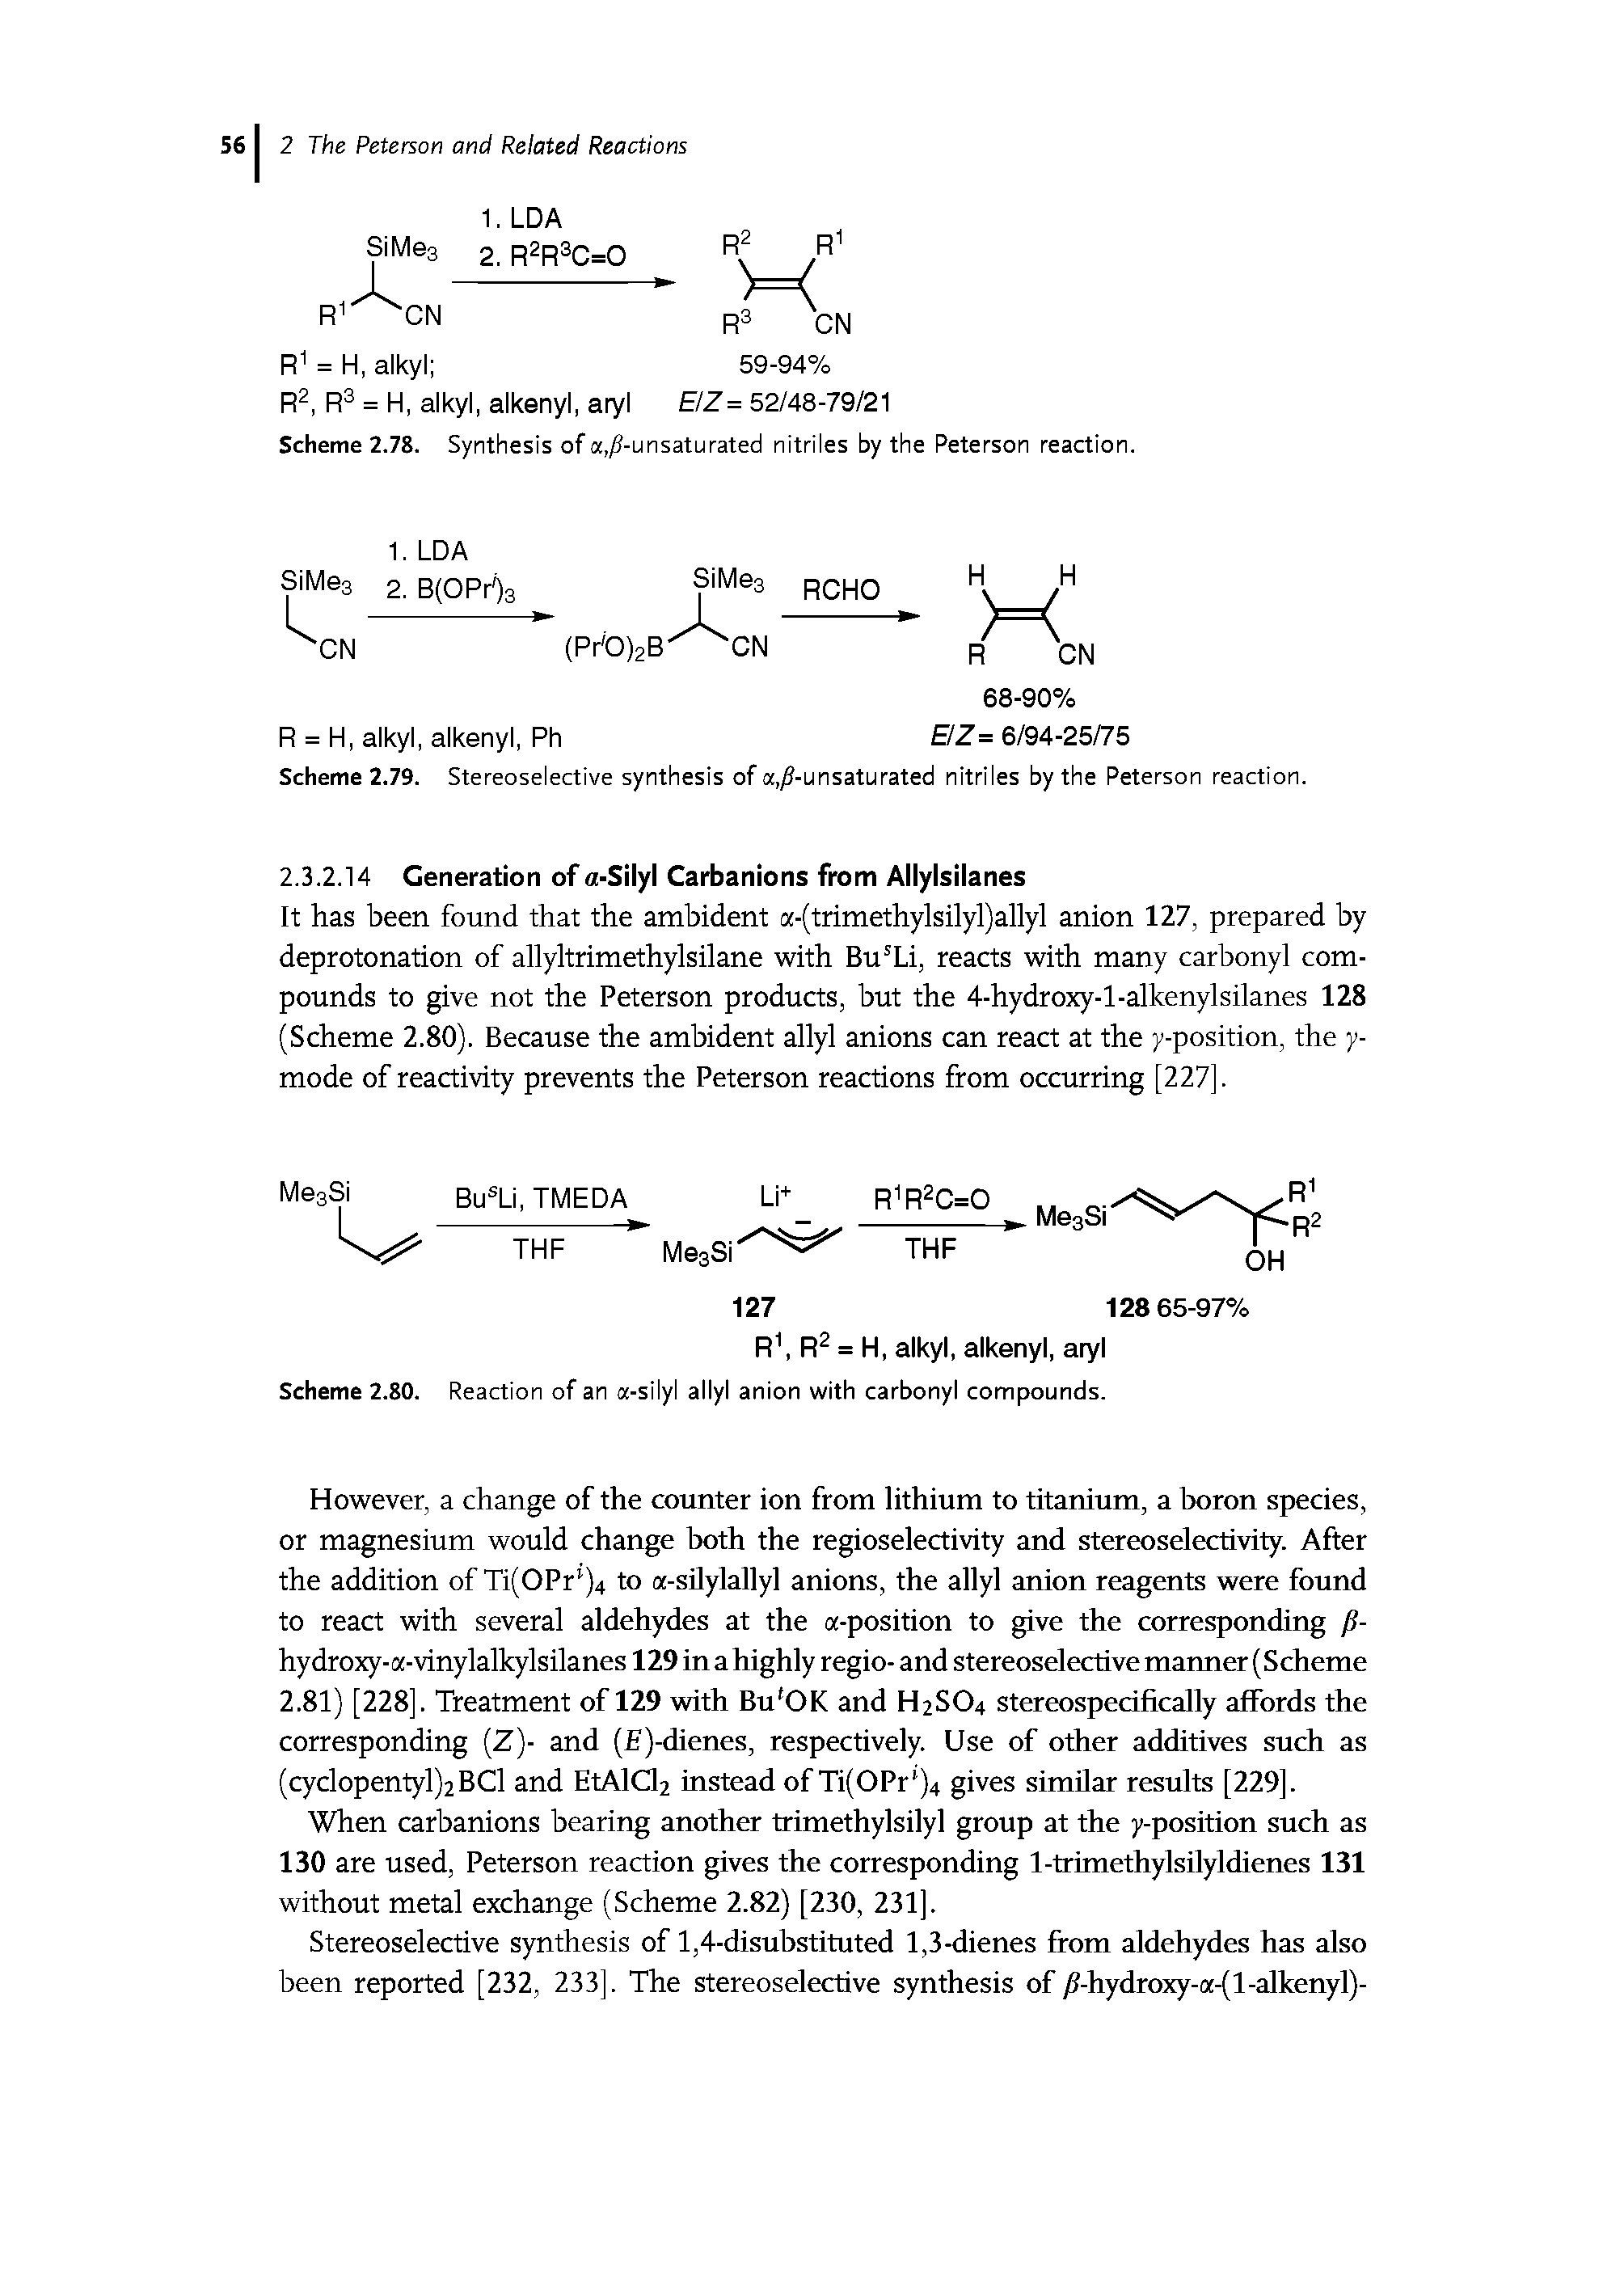 Scheme 2.79. Stereoselective synthesis of a,jS-unsaturated nitriles by the Peterson reaction. 2.3.2.14 Generation of a-Silyl Carbanions from Allylsilanes...